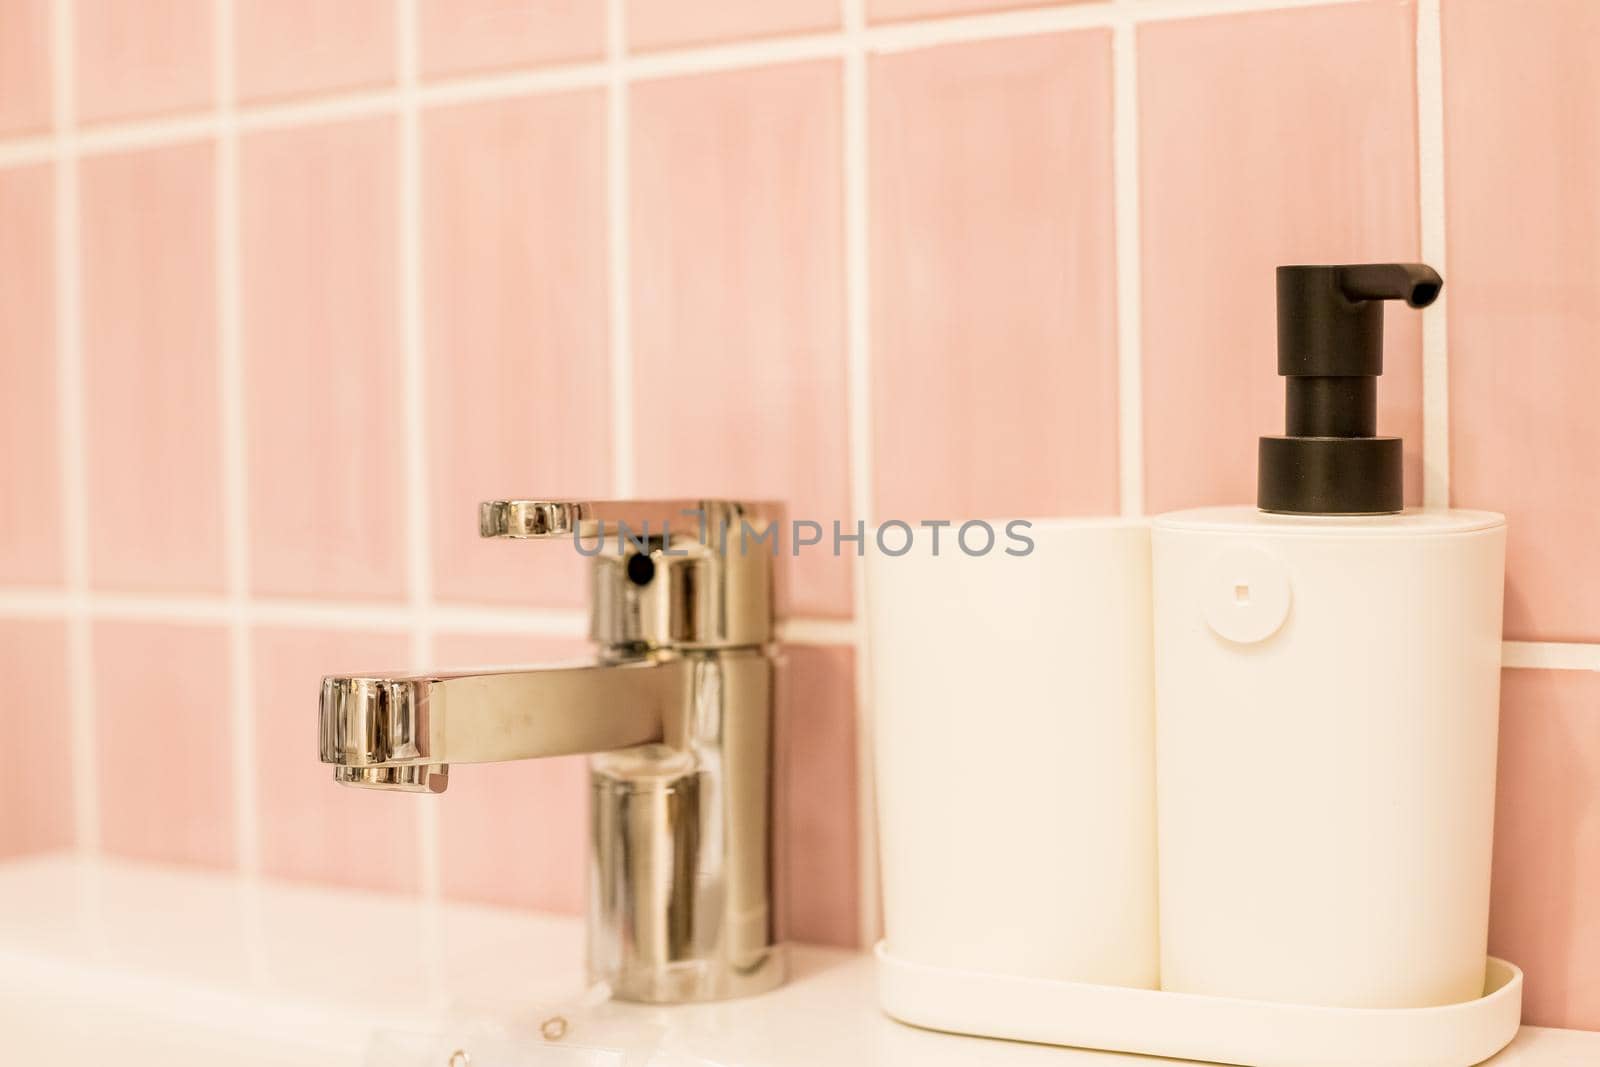 Chrome water faucet with marble counter tops,white sink.Luxury faucet mixer in bathroom. bathtub and water tap. soap in bottle dispenser near silver faucet.Sanitary prevention concept.Selective focus by YuliaYaspe1979